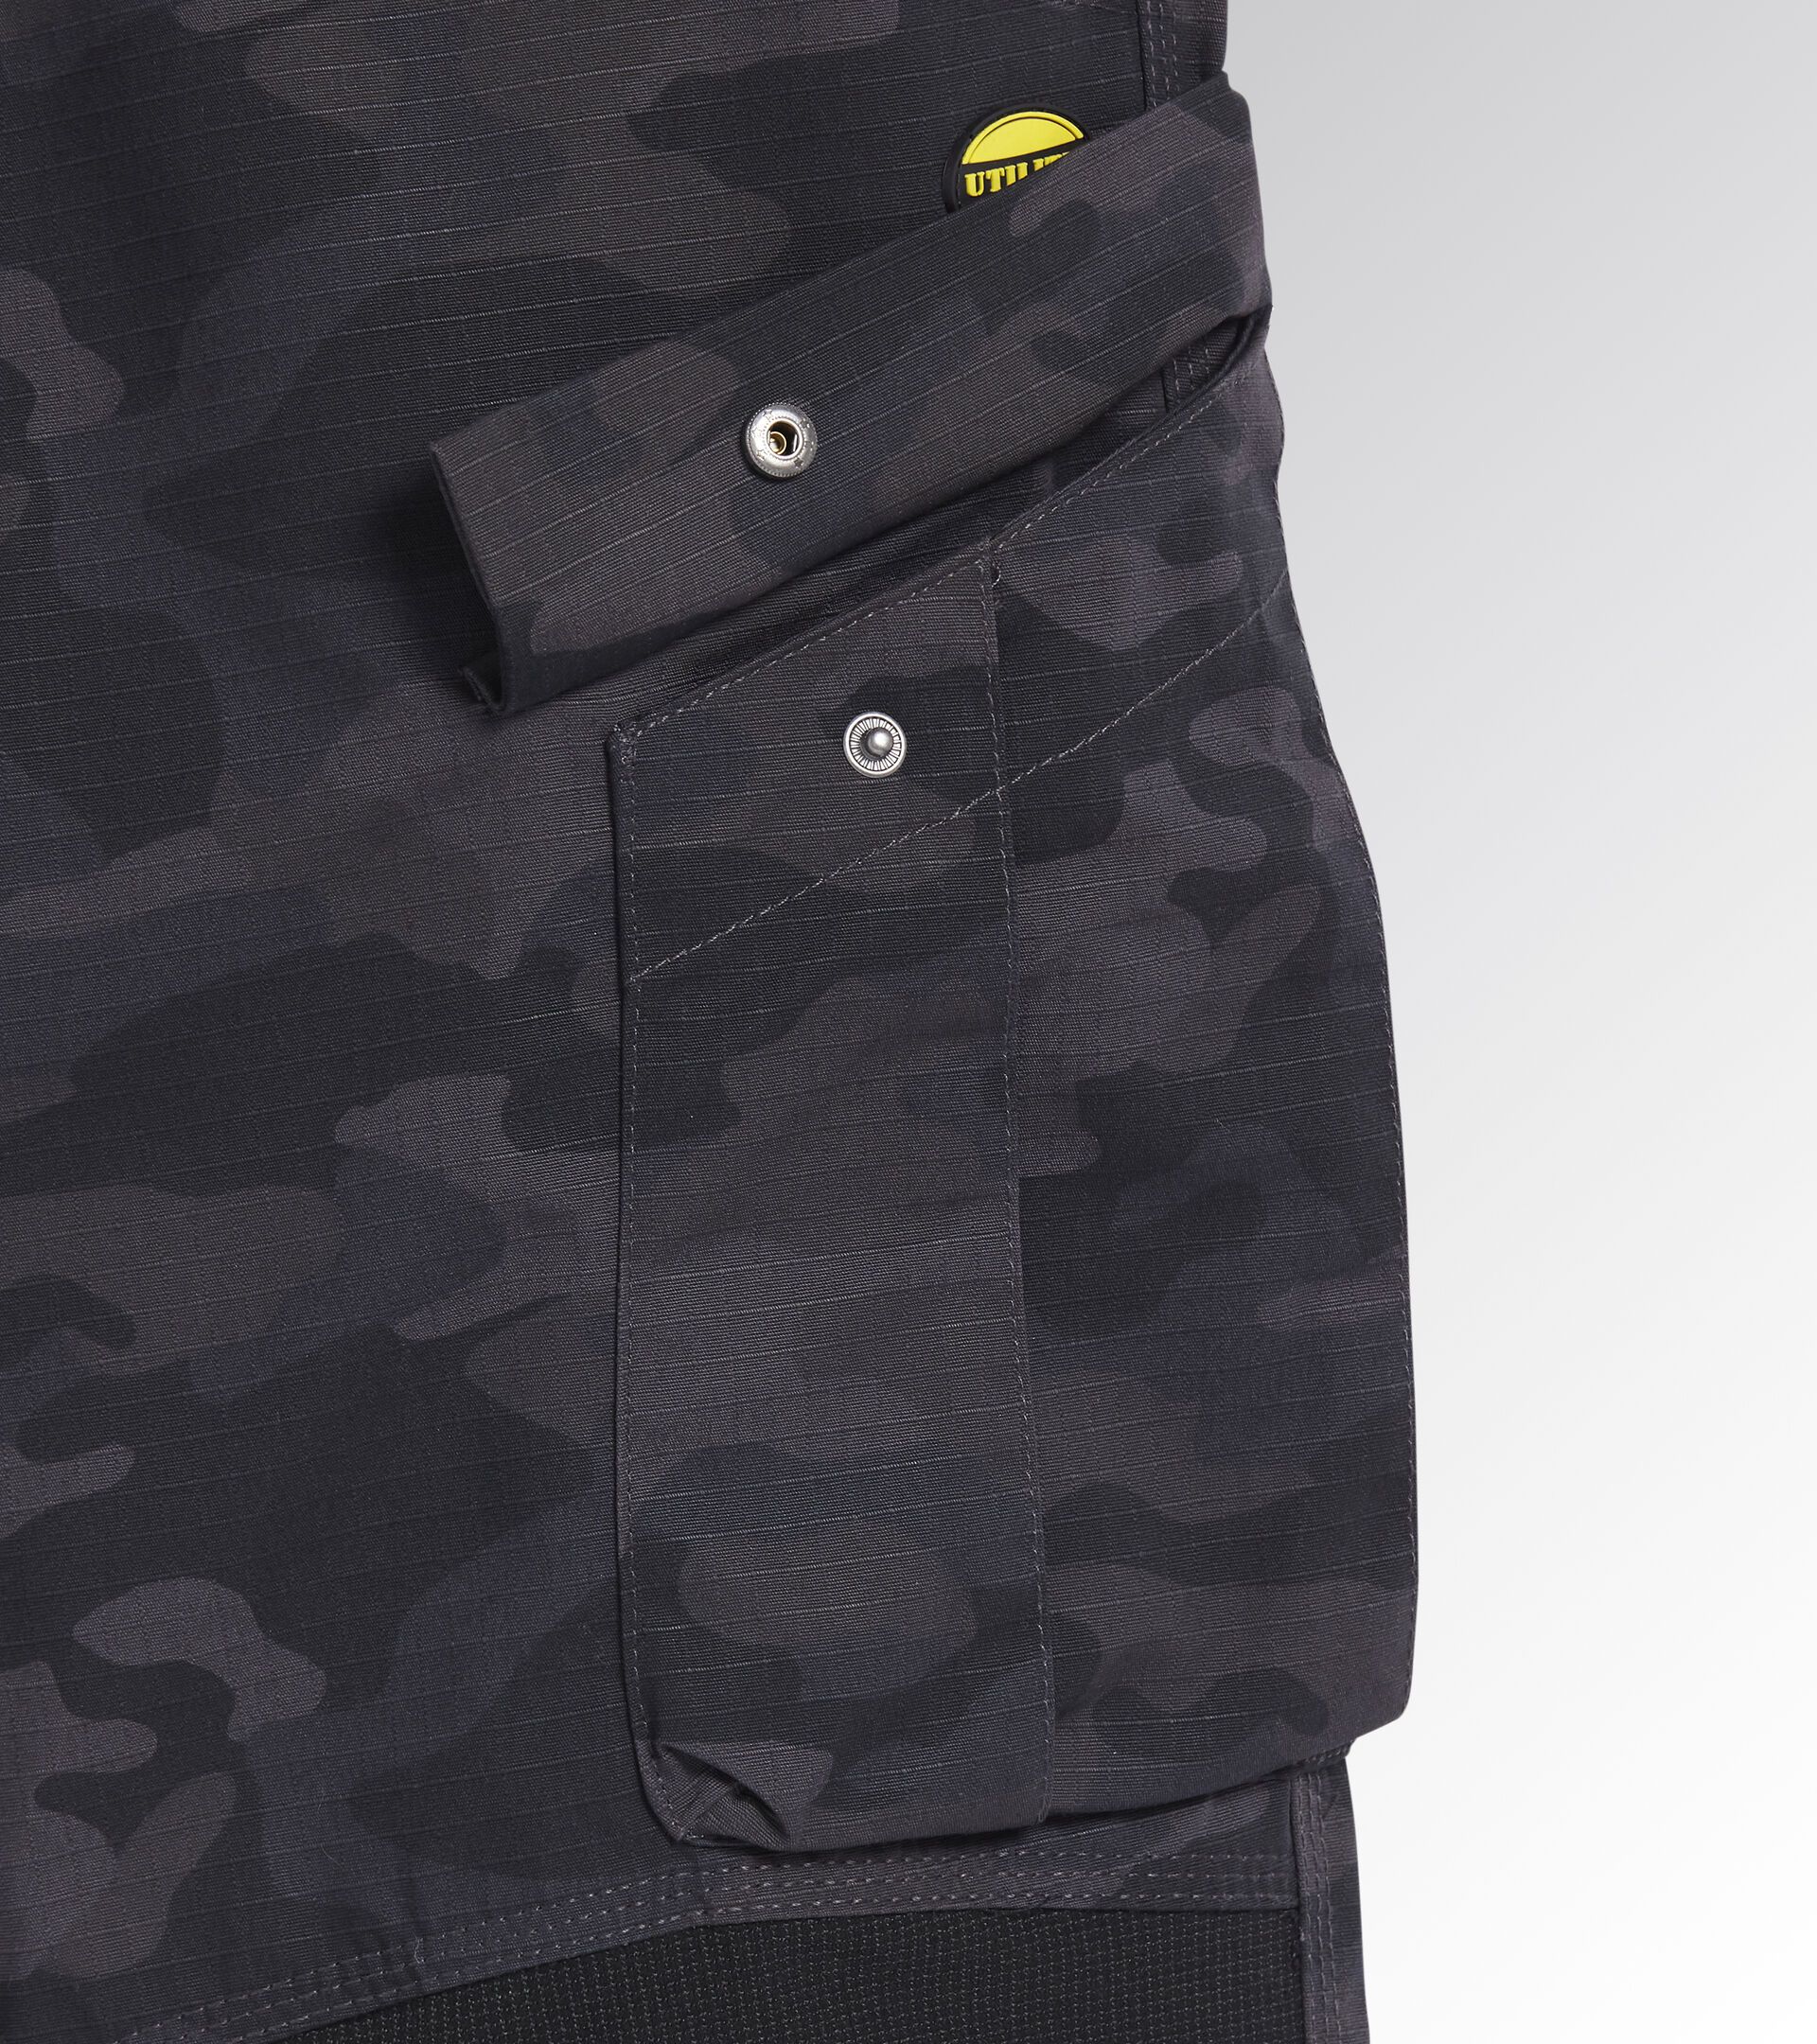 Work trousers PANT RIPSTOP CARGO CAMO GRAY CAMOUFLAGE - Utility